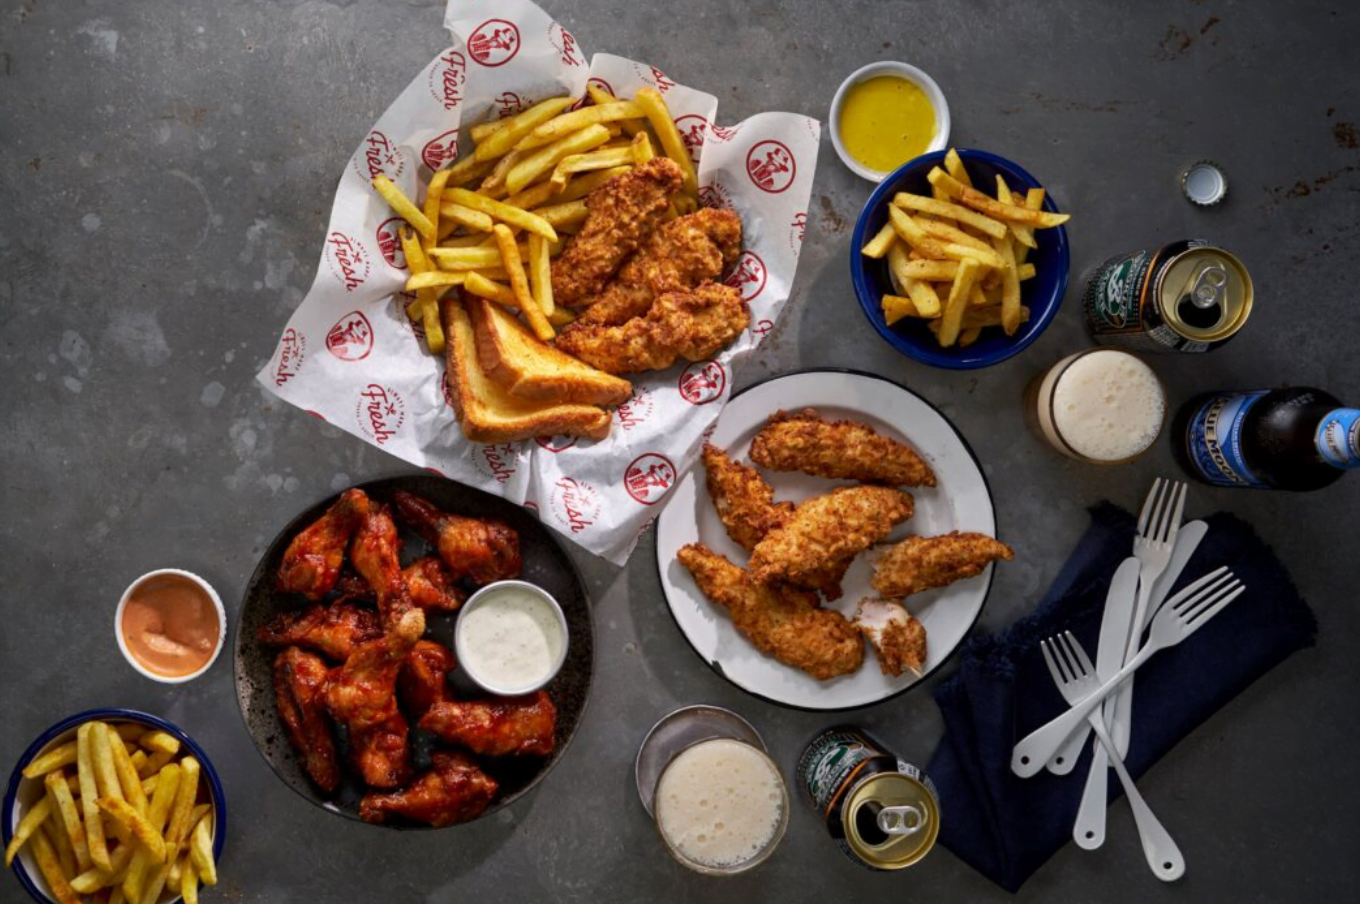 Largest Slim Chickens to open in Manchester, UK